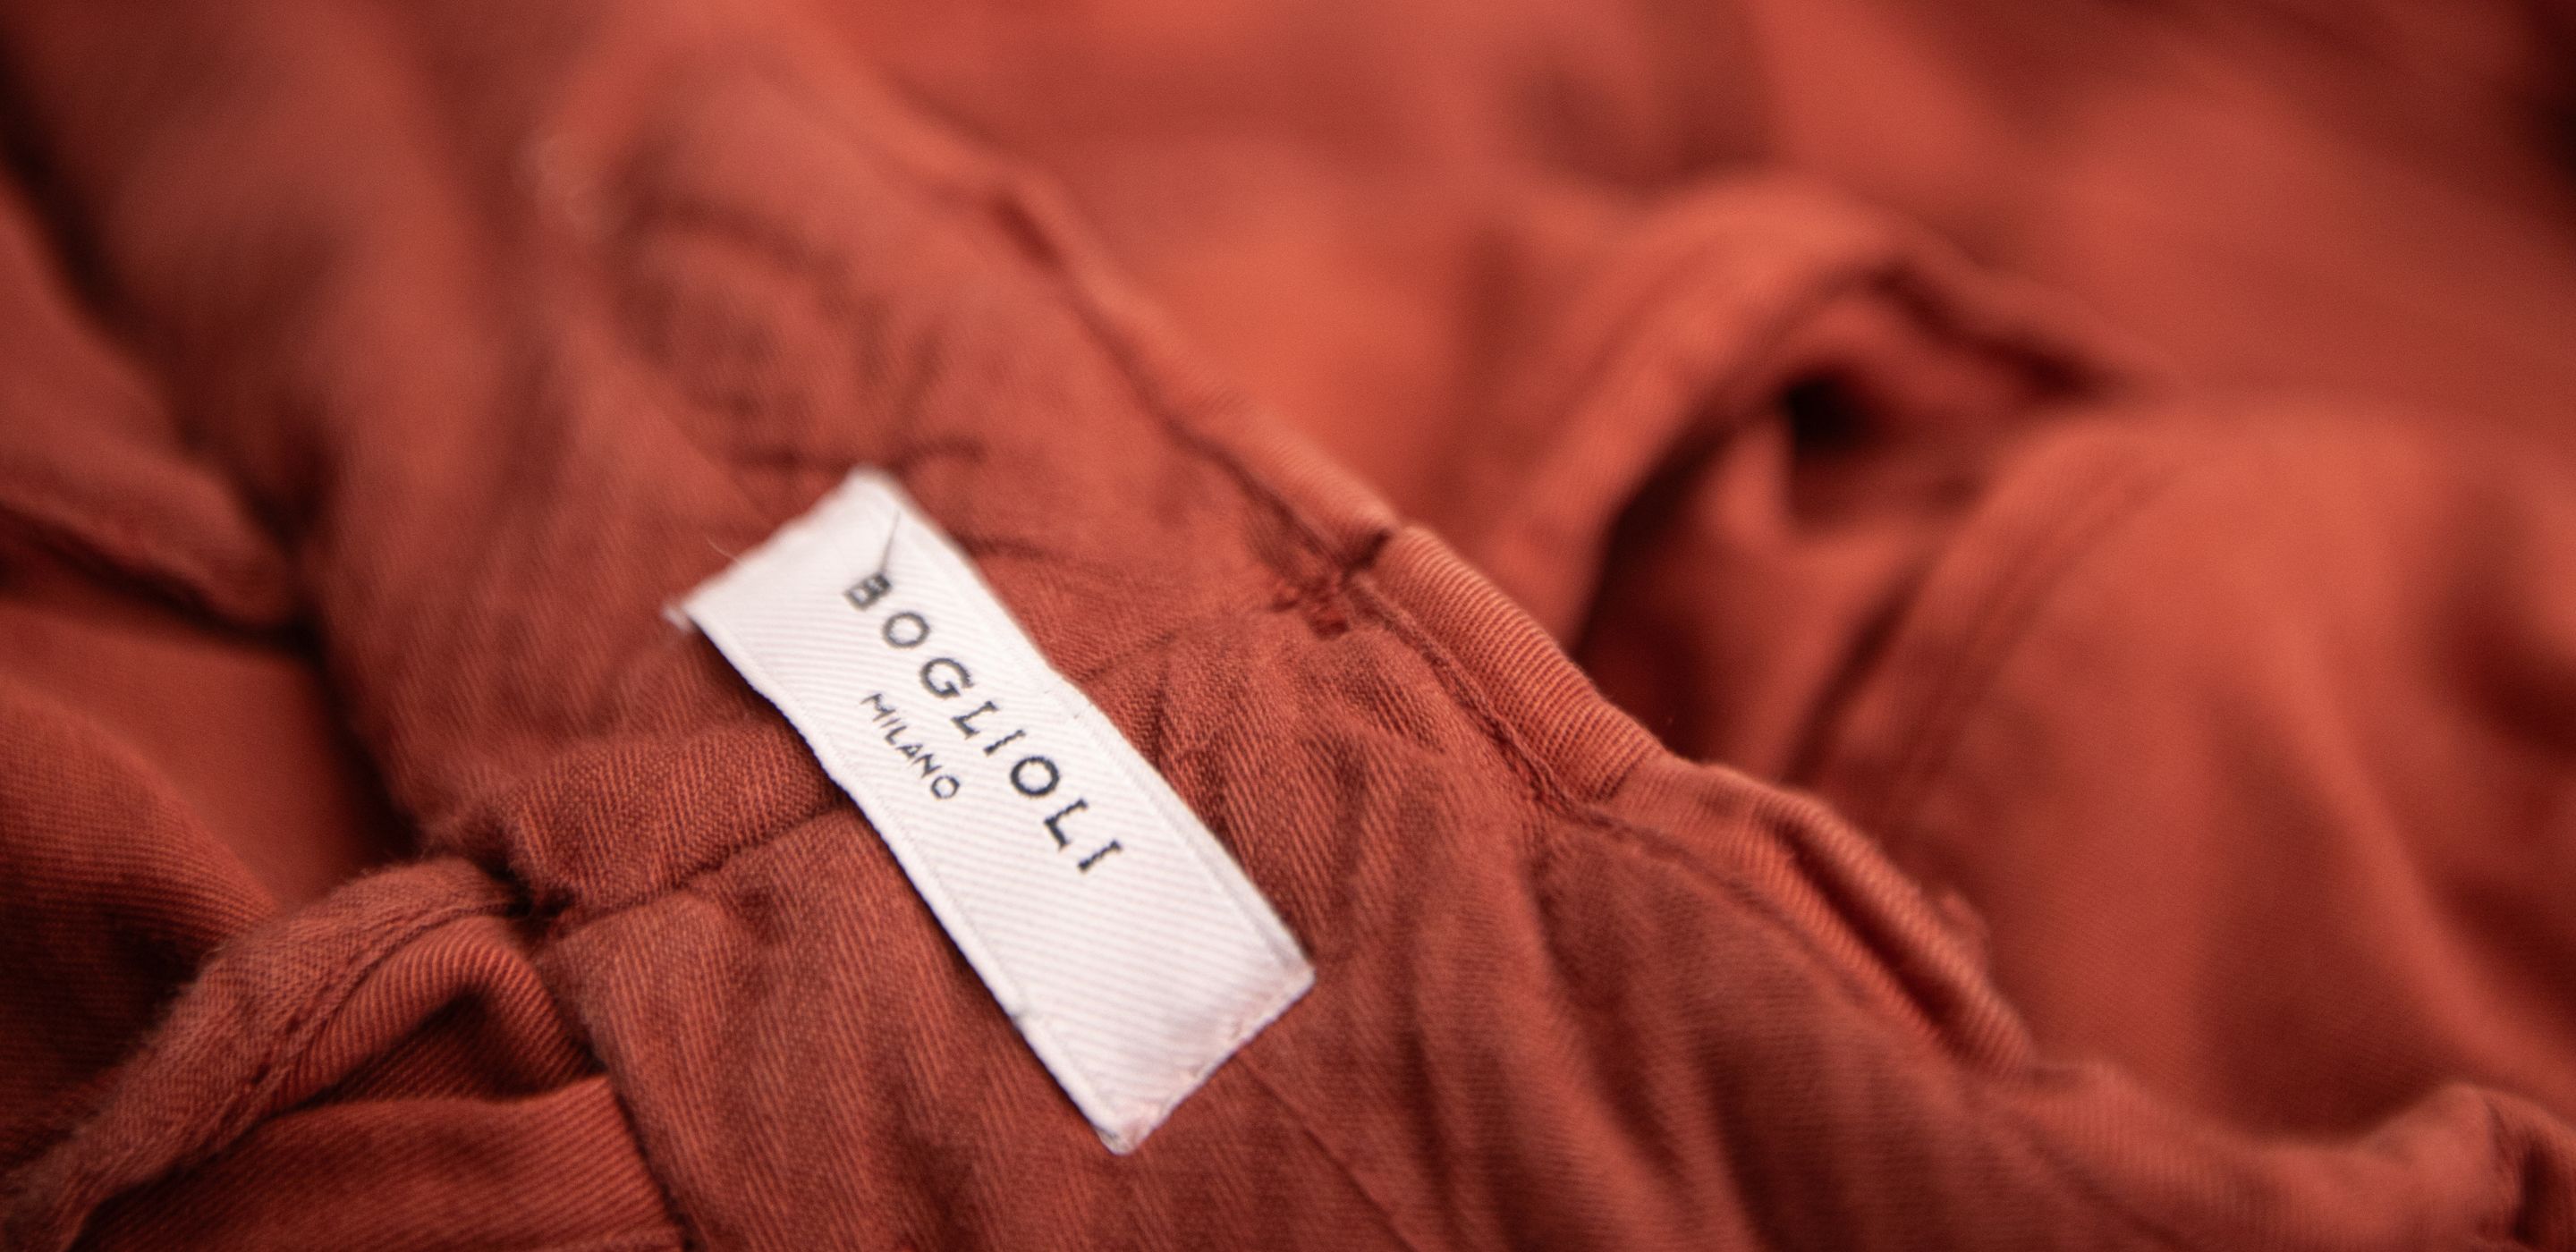 Garment Dyed Clothing, what does it mean?